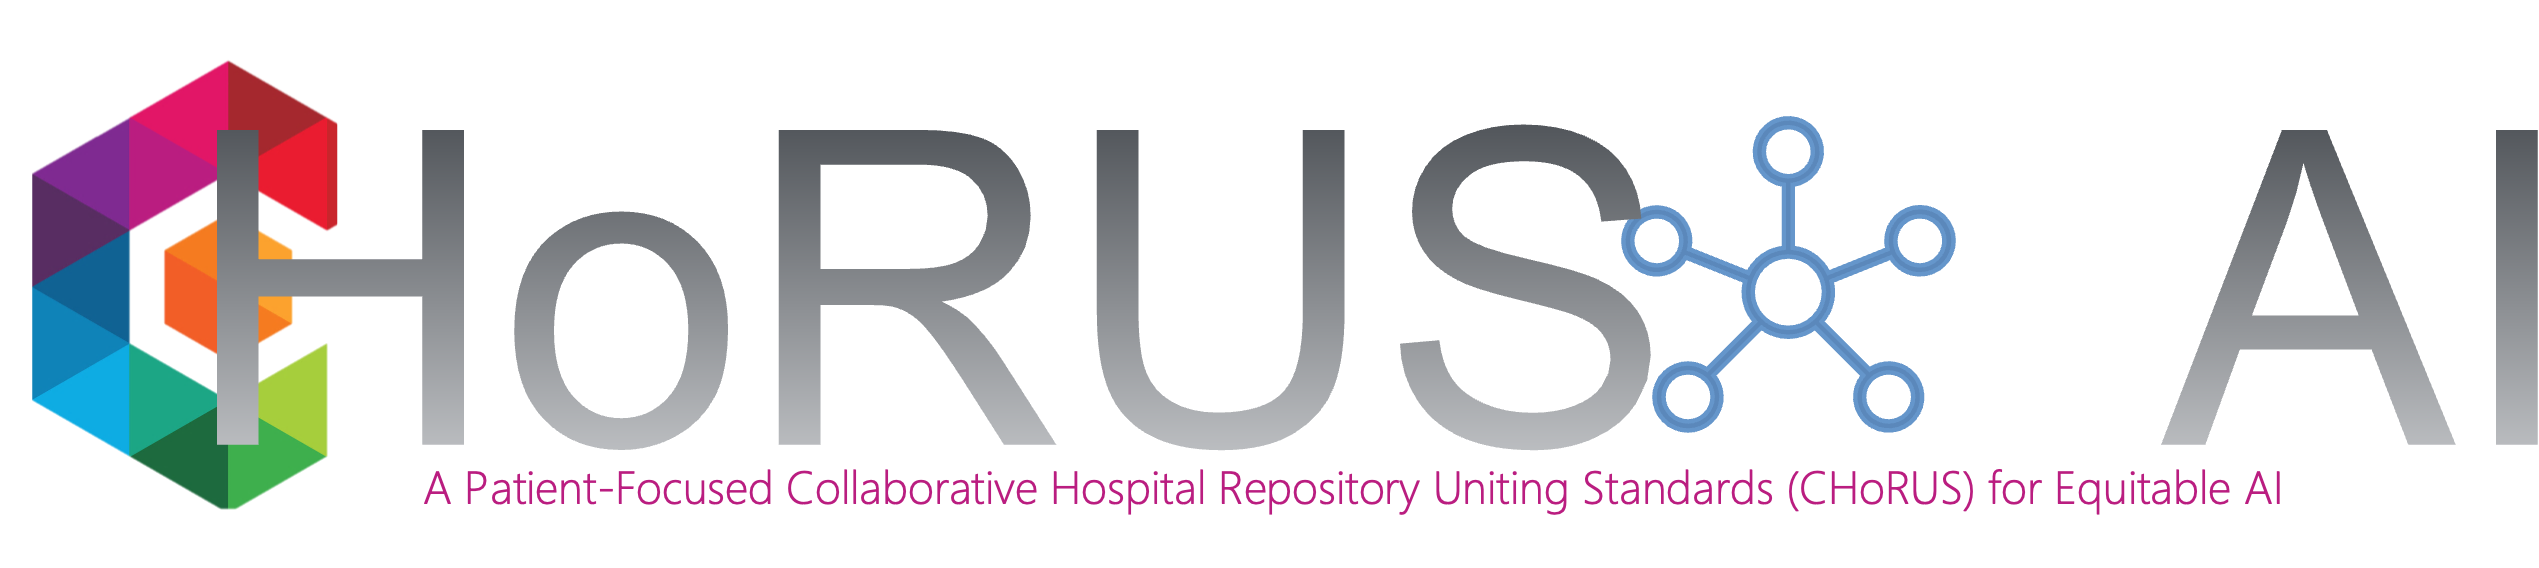 Patient-Focused Collaborative Hospital Repository Uniting Standards (CHoRUS) for Equitable AI